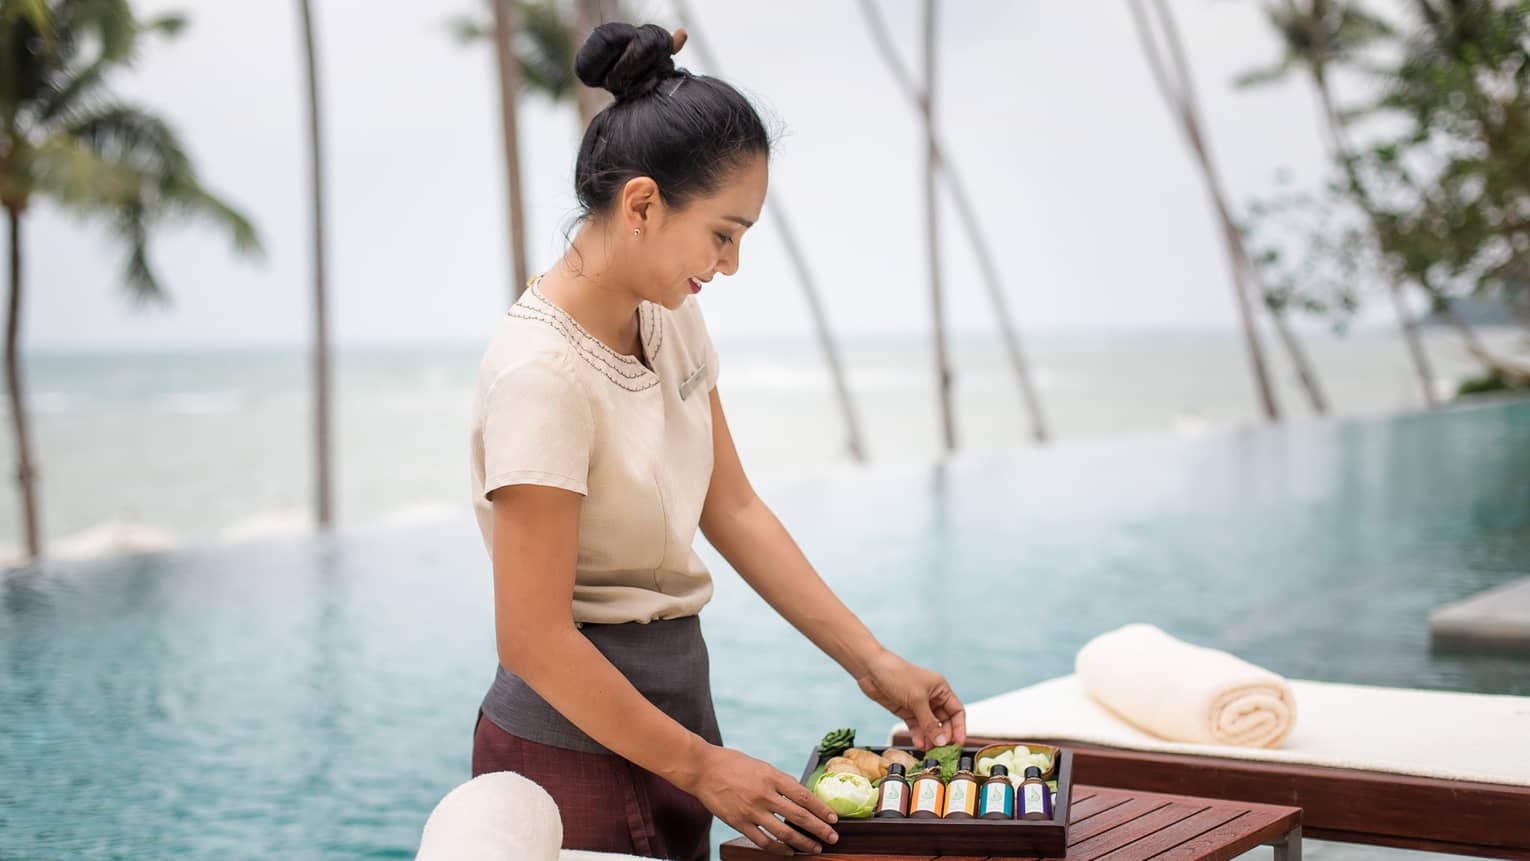 Spa attendant stands in front of swimming pool, holds wood box with bottles, soaps